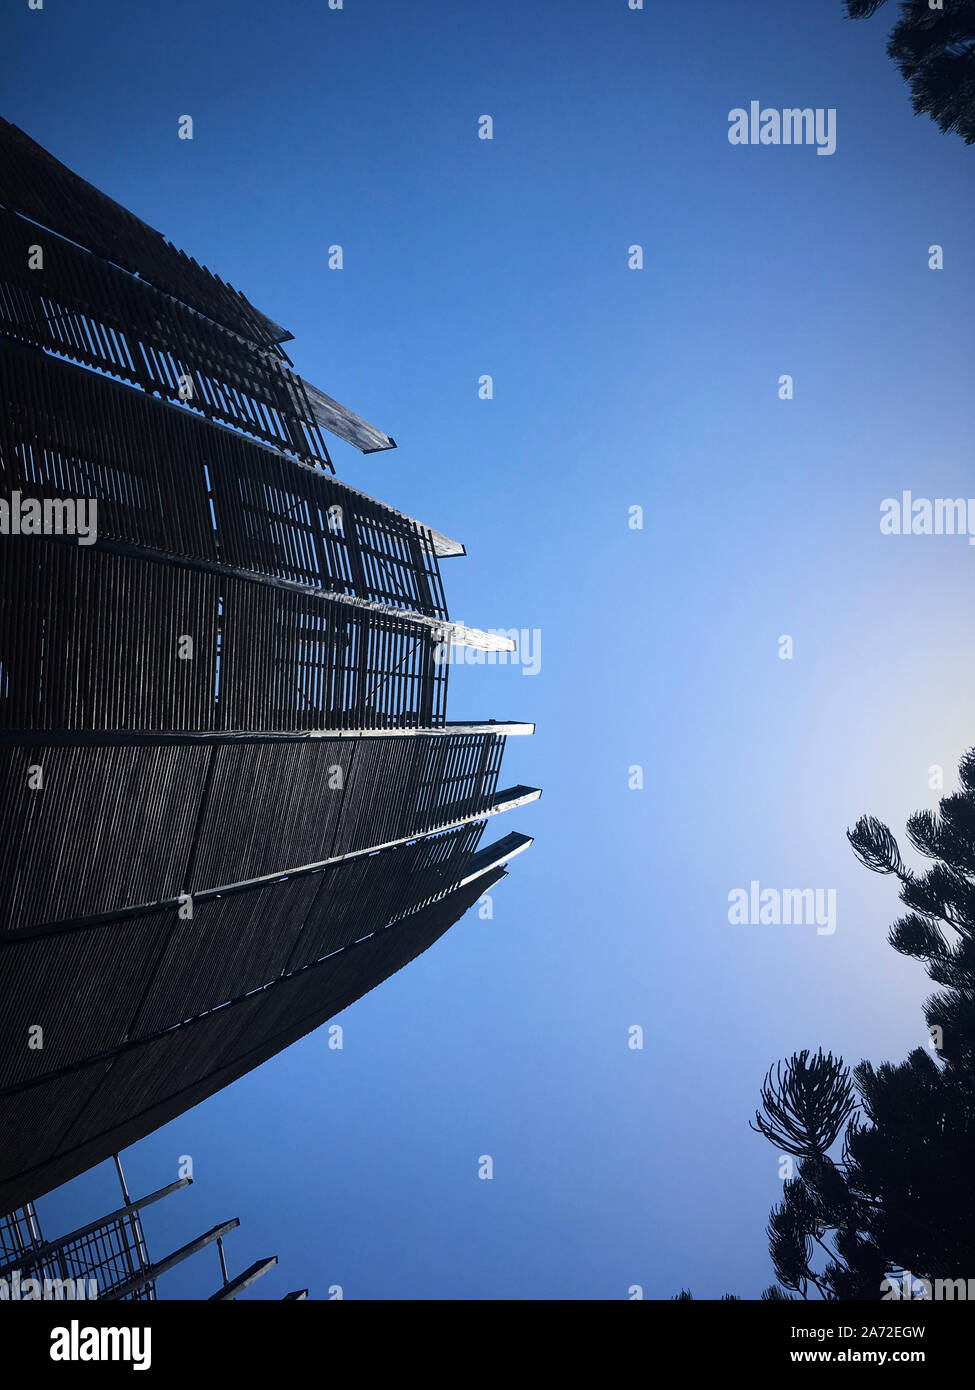 A stunning hut peak of part of the Jean-Marie Tjibaou Cultural Centre designed by Renzo Piano. Stock Photo